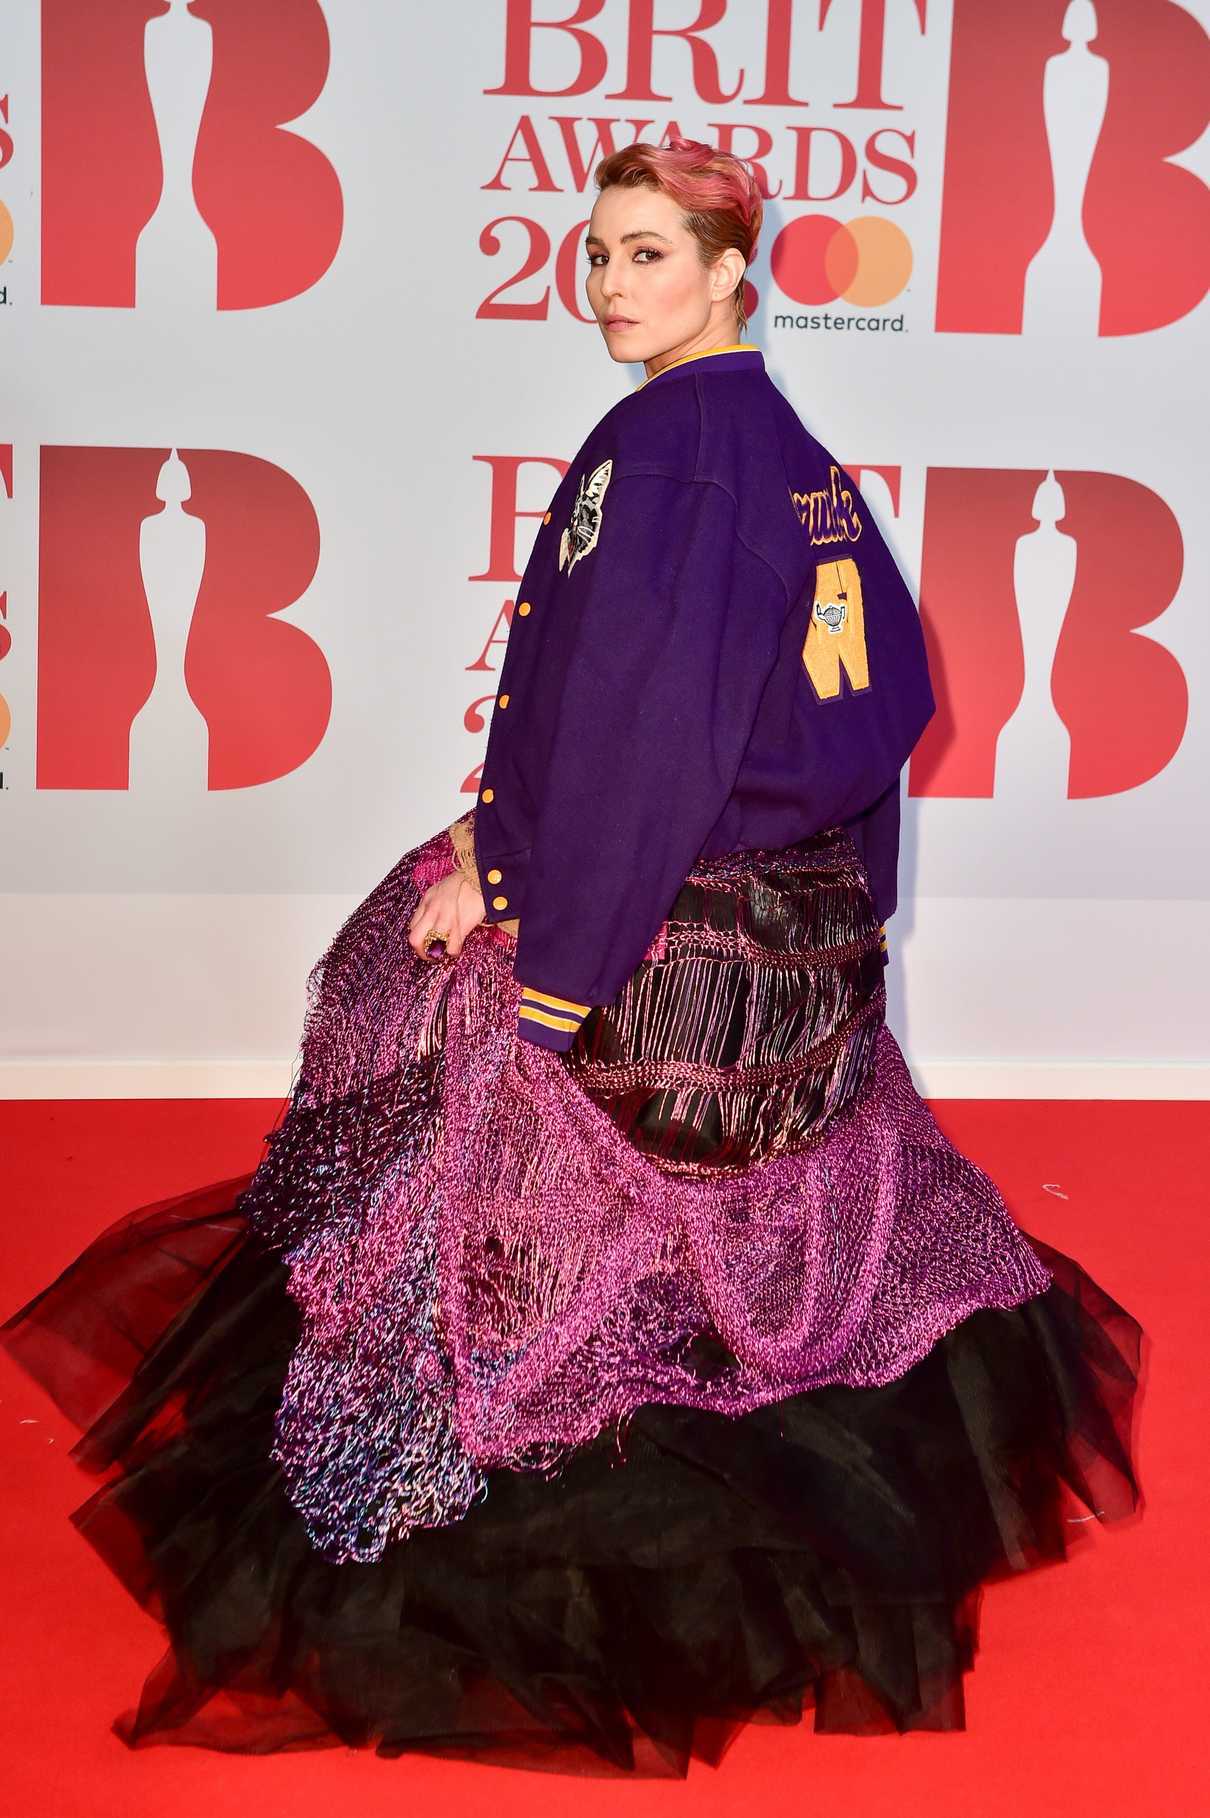 Noomi Rapace Attends the 2018 Brit Awards at the O2 Arena in London 02/21/2018-4